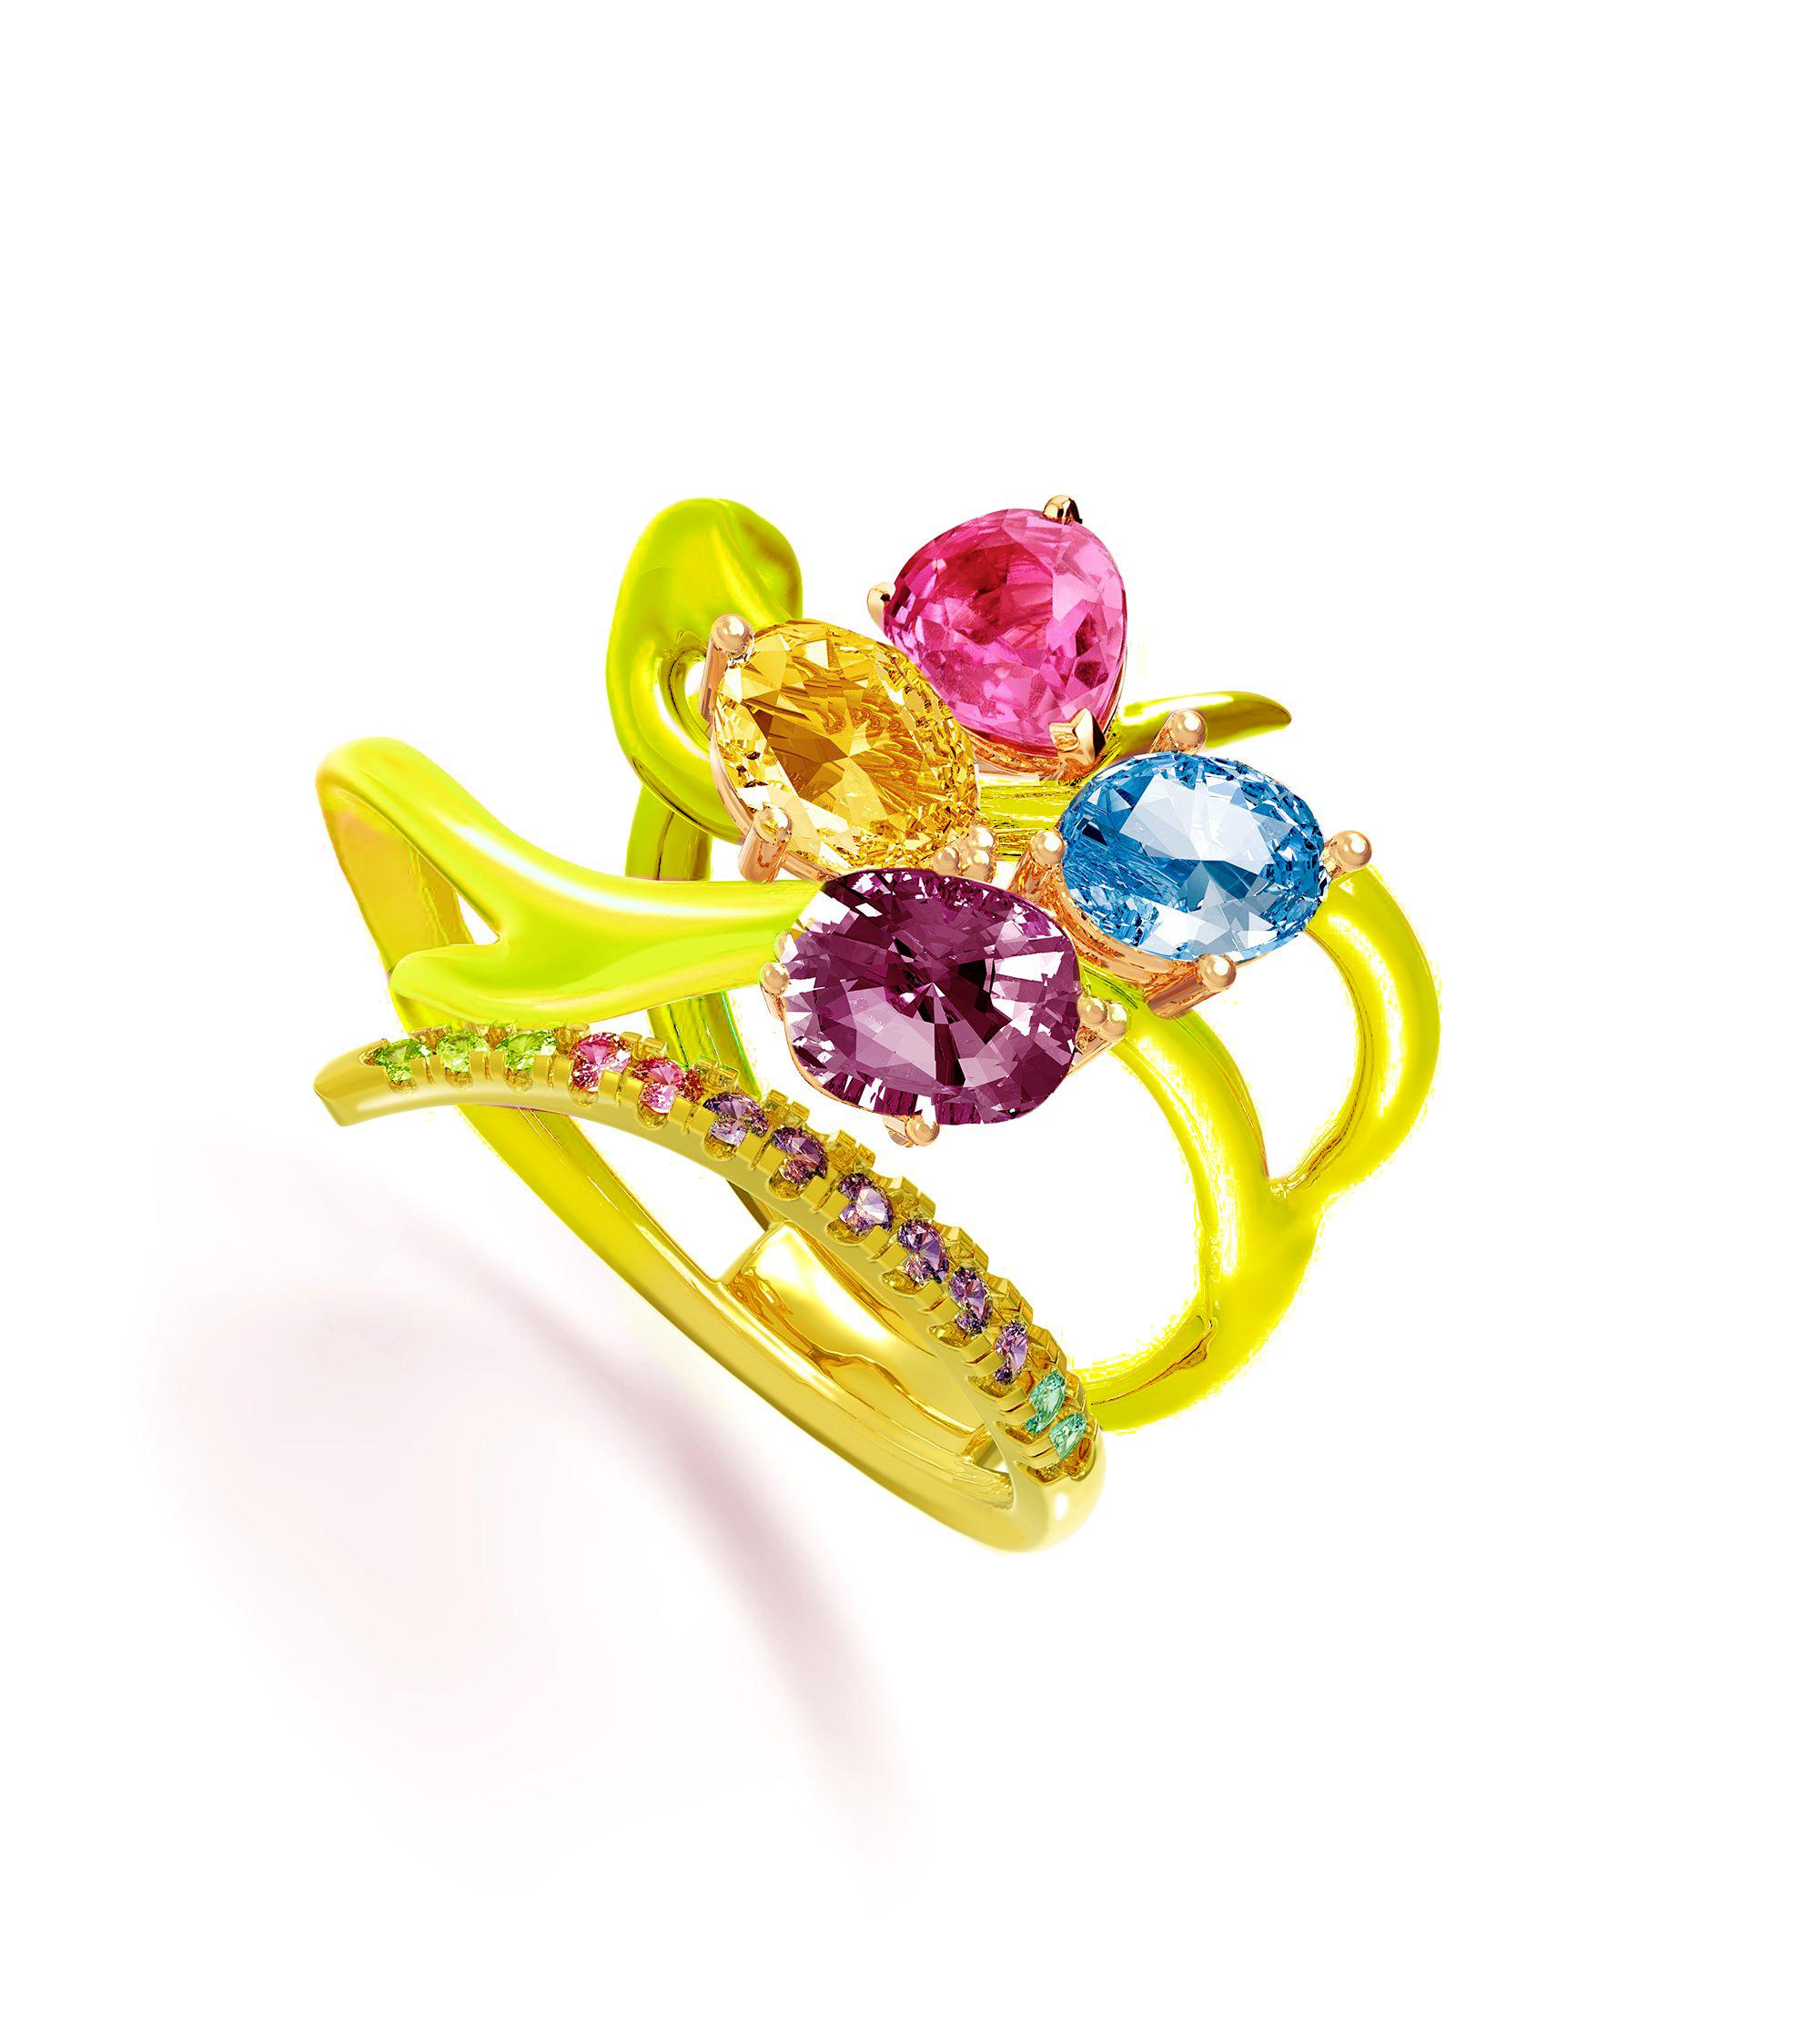 This Harajuku contemporary cocktail ring is made of 18 karat yellow gold with natural gems on your choice custom made.
The gems are:
Oval or pear cut pink sapphire, 2,17 carats;
Unheated untreated yellow sapphire in oval cut, 1,61 carats;
Blue swiss